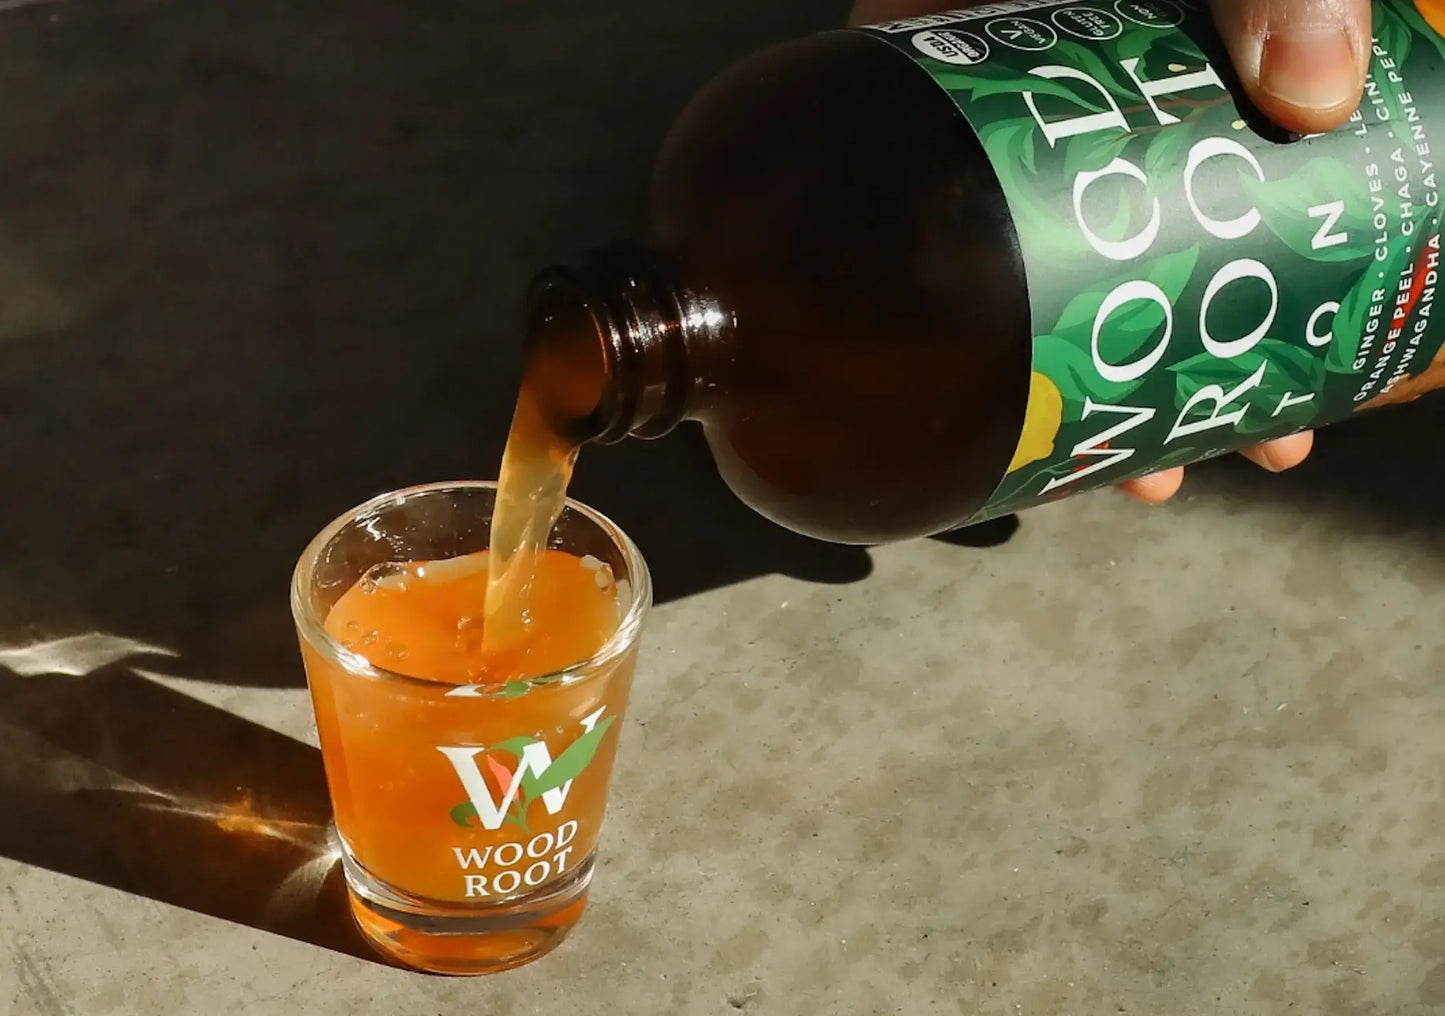 Hand pouring Woodroot Tonic gut shot into shot glass.